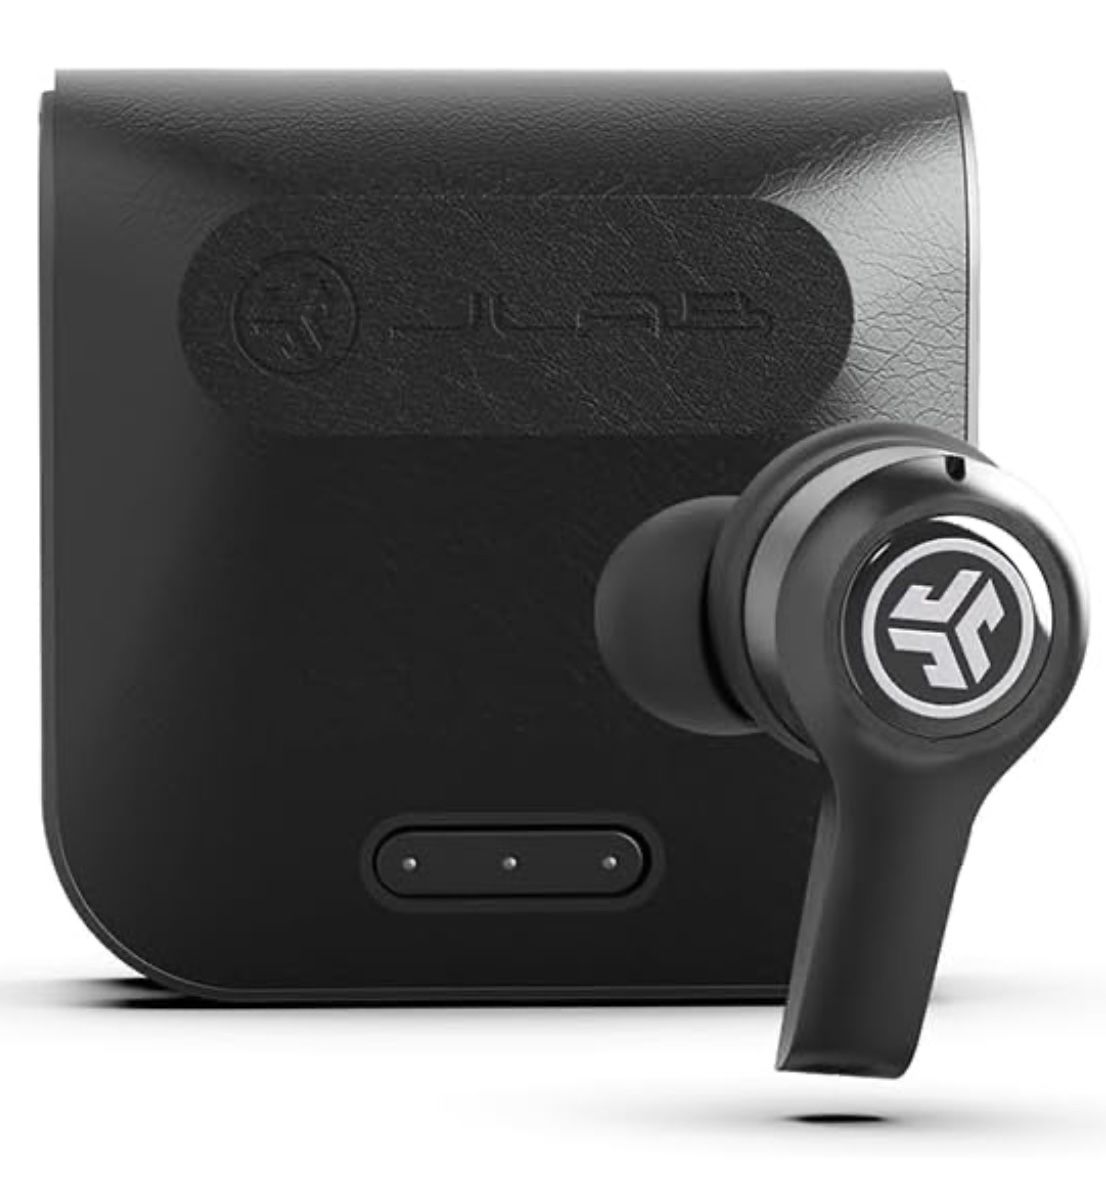 JLab JBuds Air Executive True Wireless Bluetooth Earbuds + Charging Case, Black, C3 Calling with Dual Microphones, Long Travel Playtime, Bluetooth 5.0